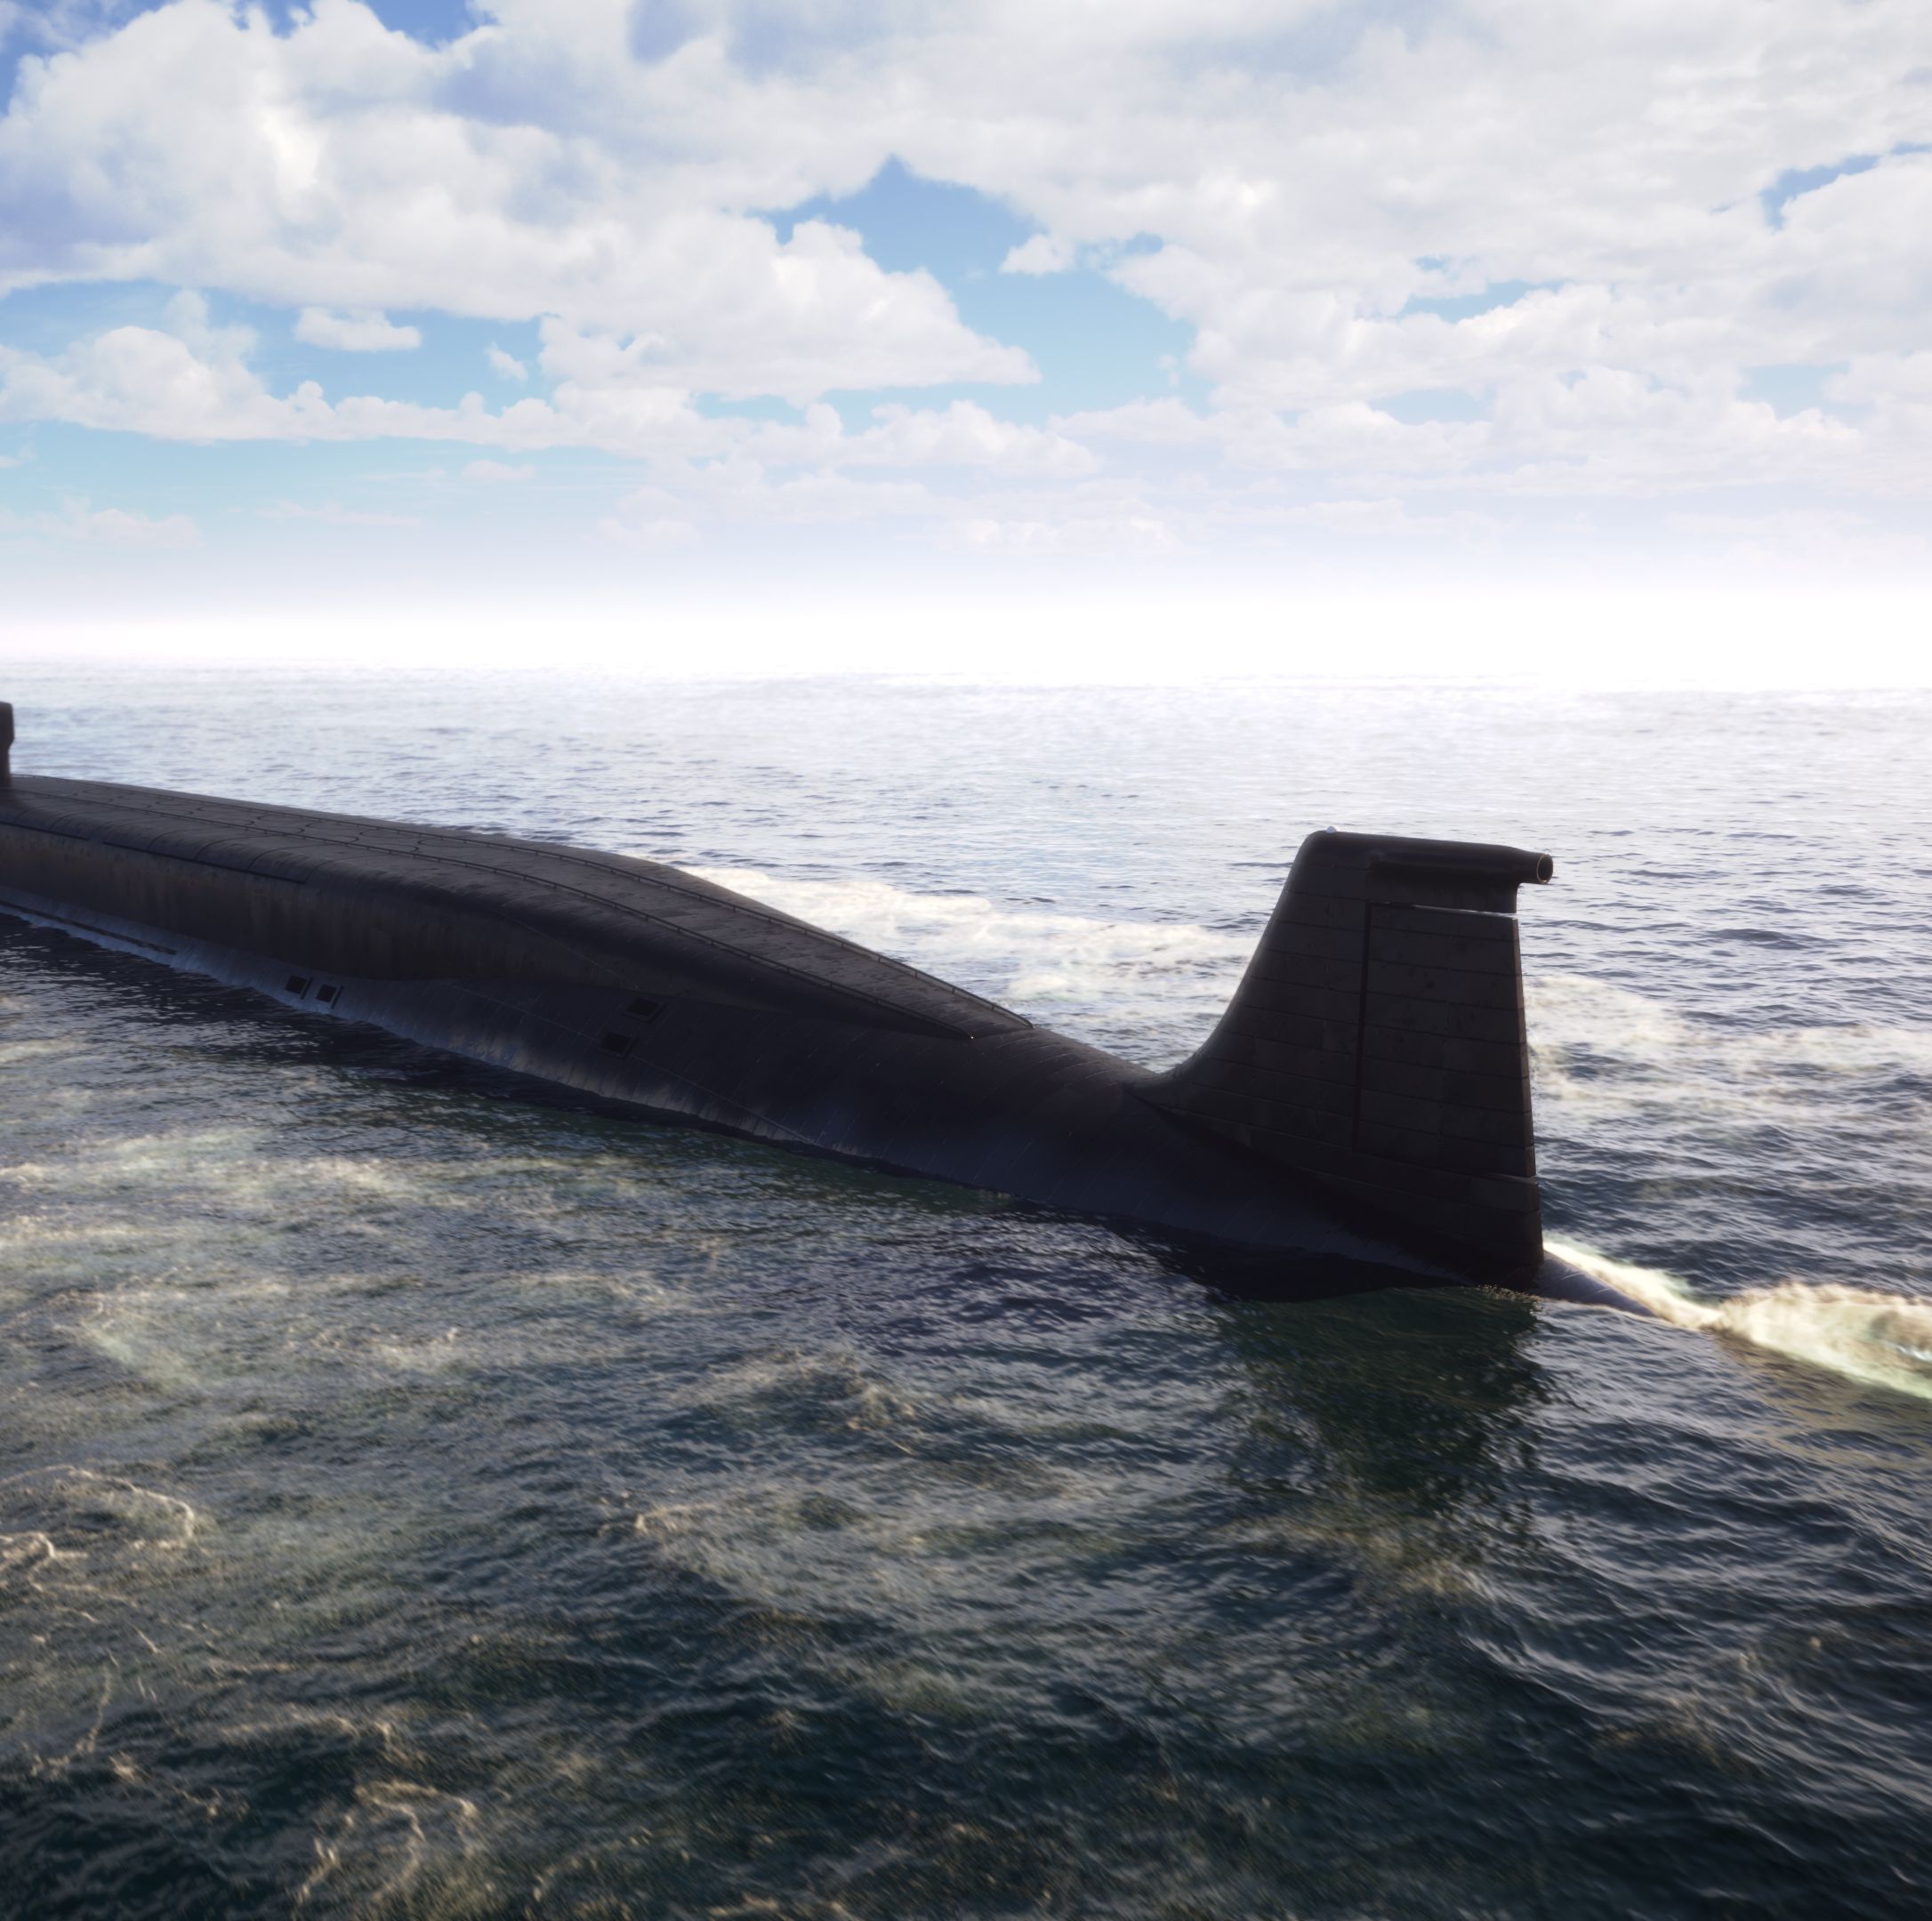 Don't Worry, Russia Probably Won't Be Launching Its Nuclear 'Apocalypse' Torpedo (At Least Anytime Soon)